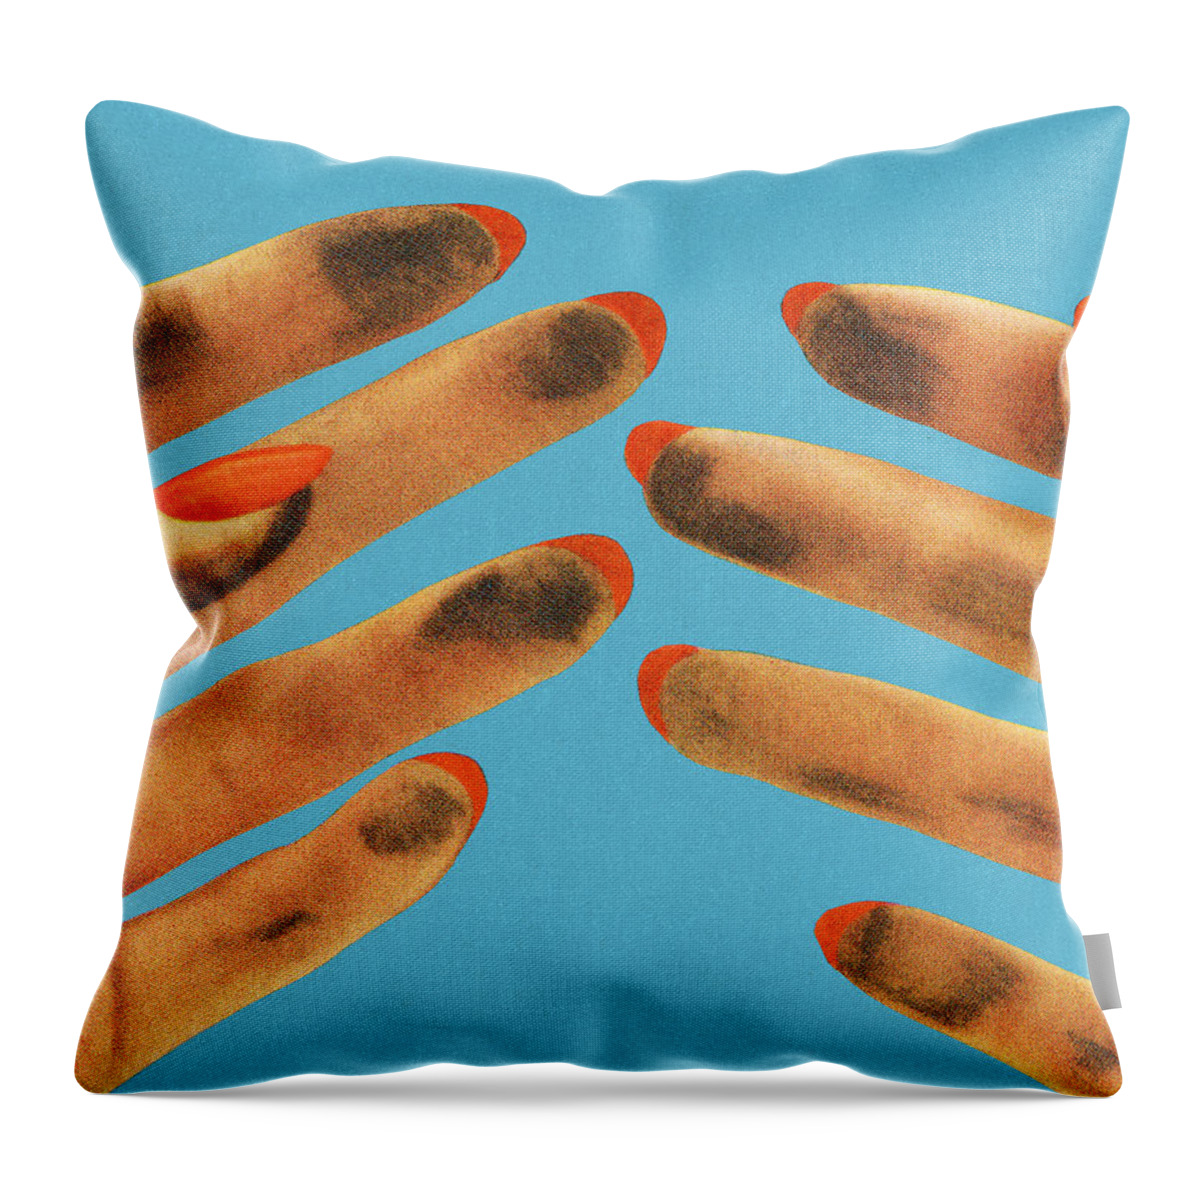 Blue Background Throw Pillow featuring the drawing Hand With Dirty Fingers by CSA Images